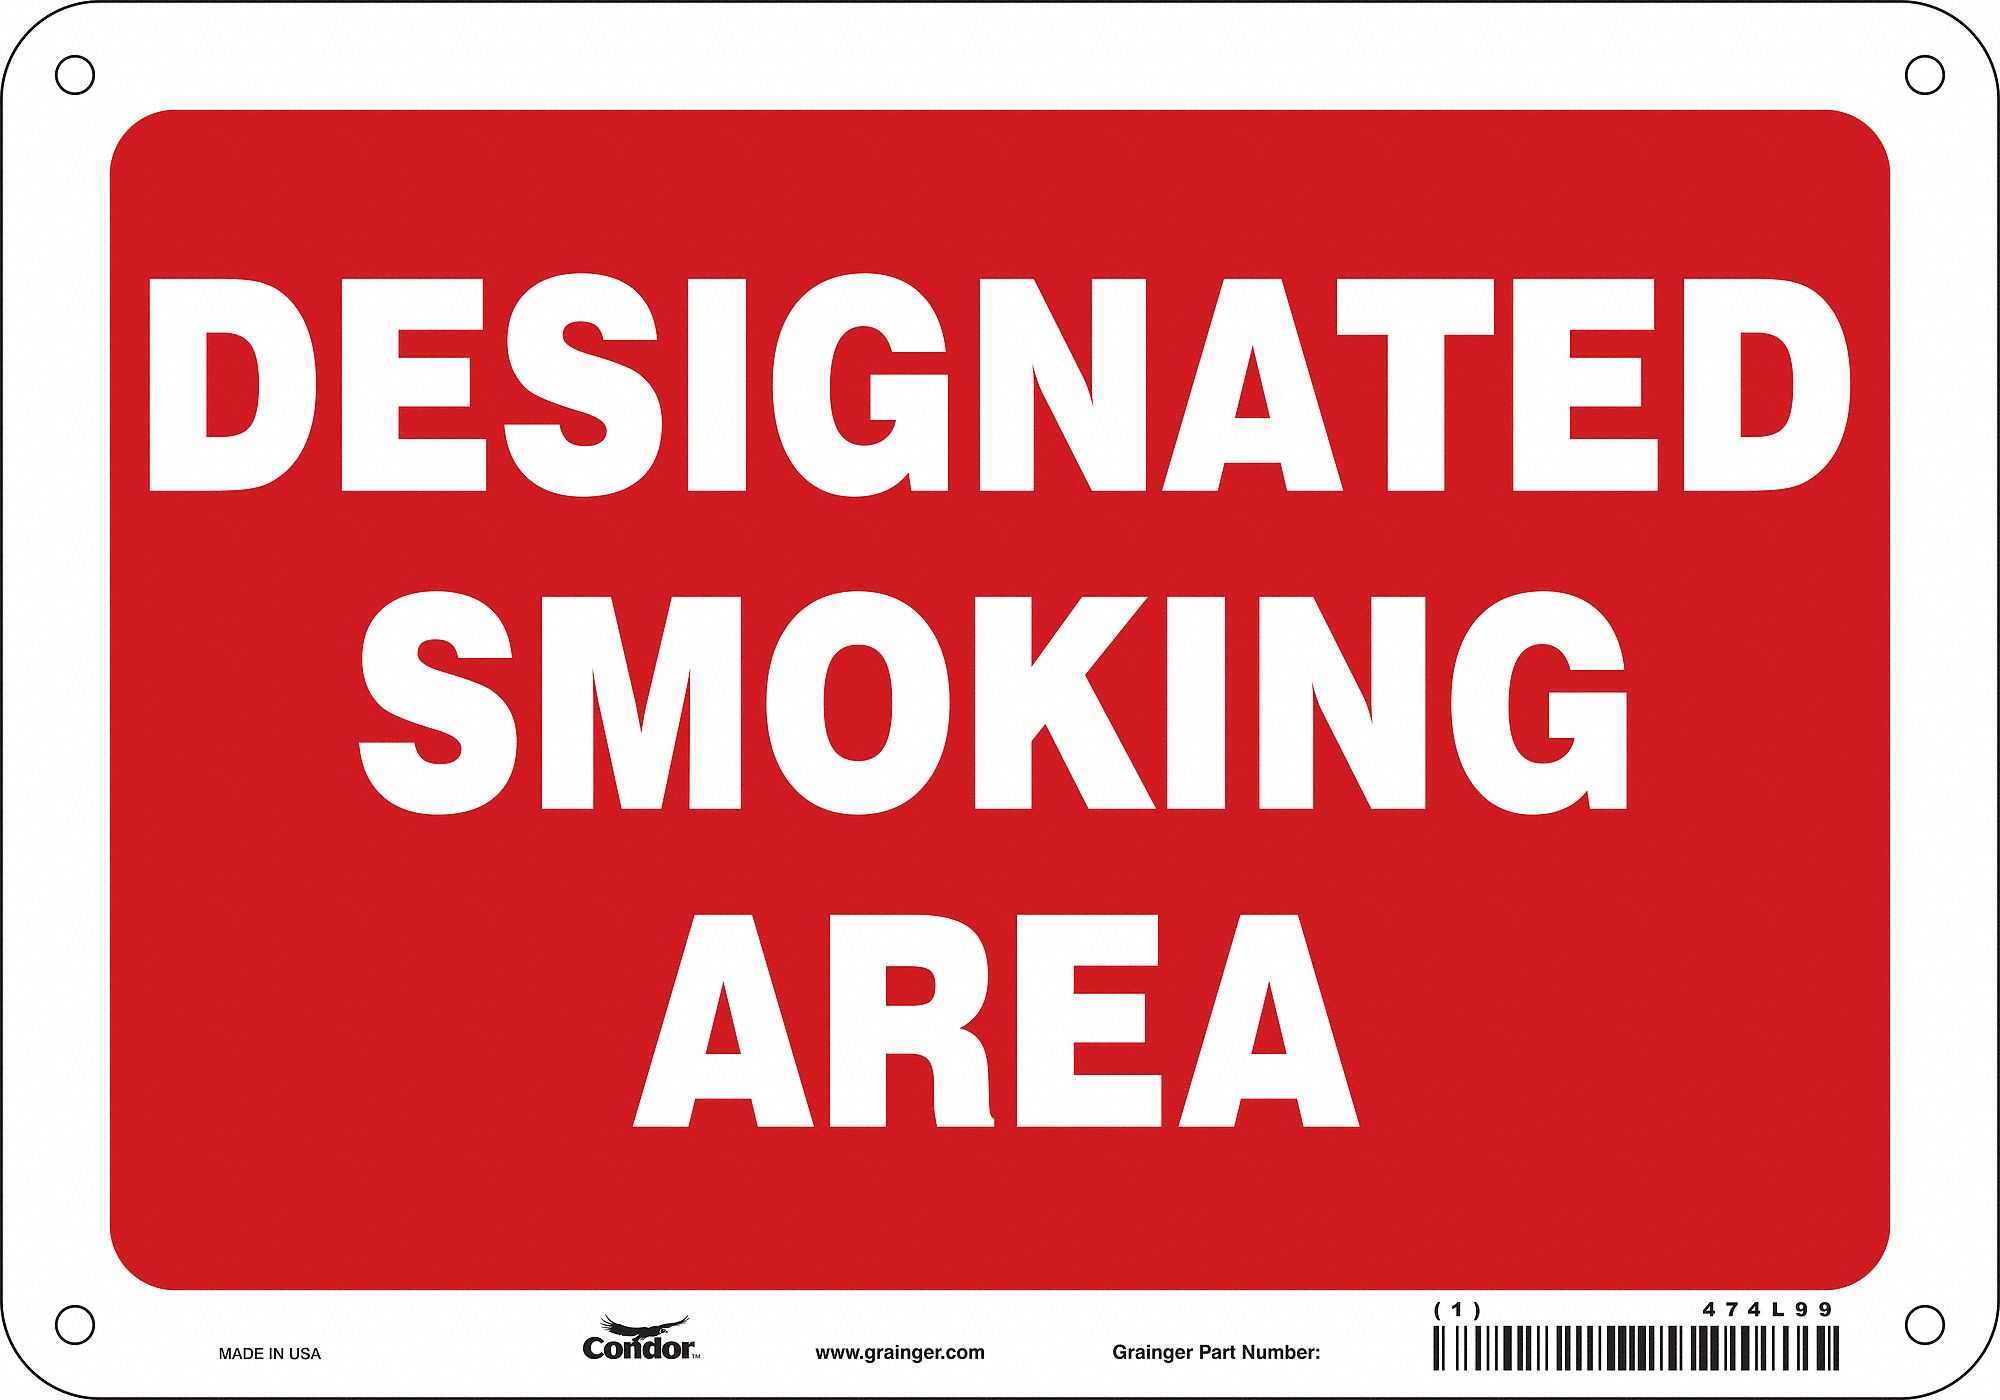 Designated smoking area directional left arrow pointer Safety sign 